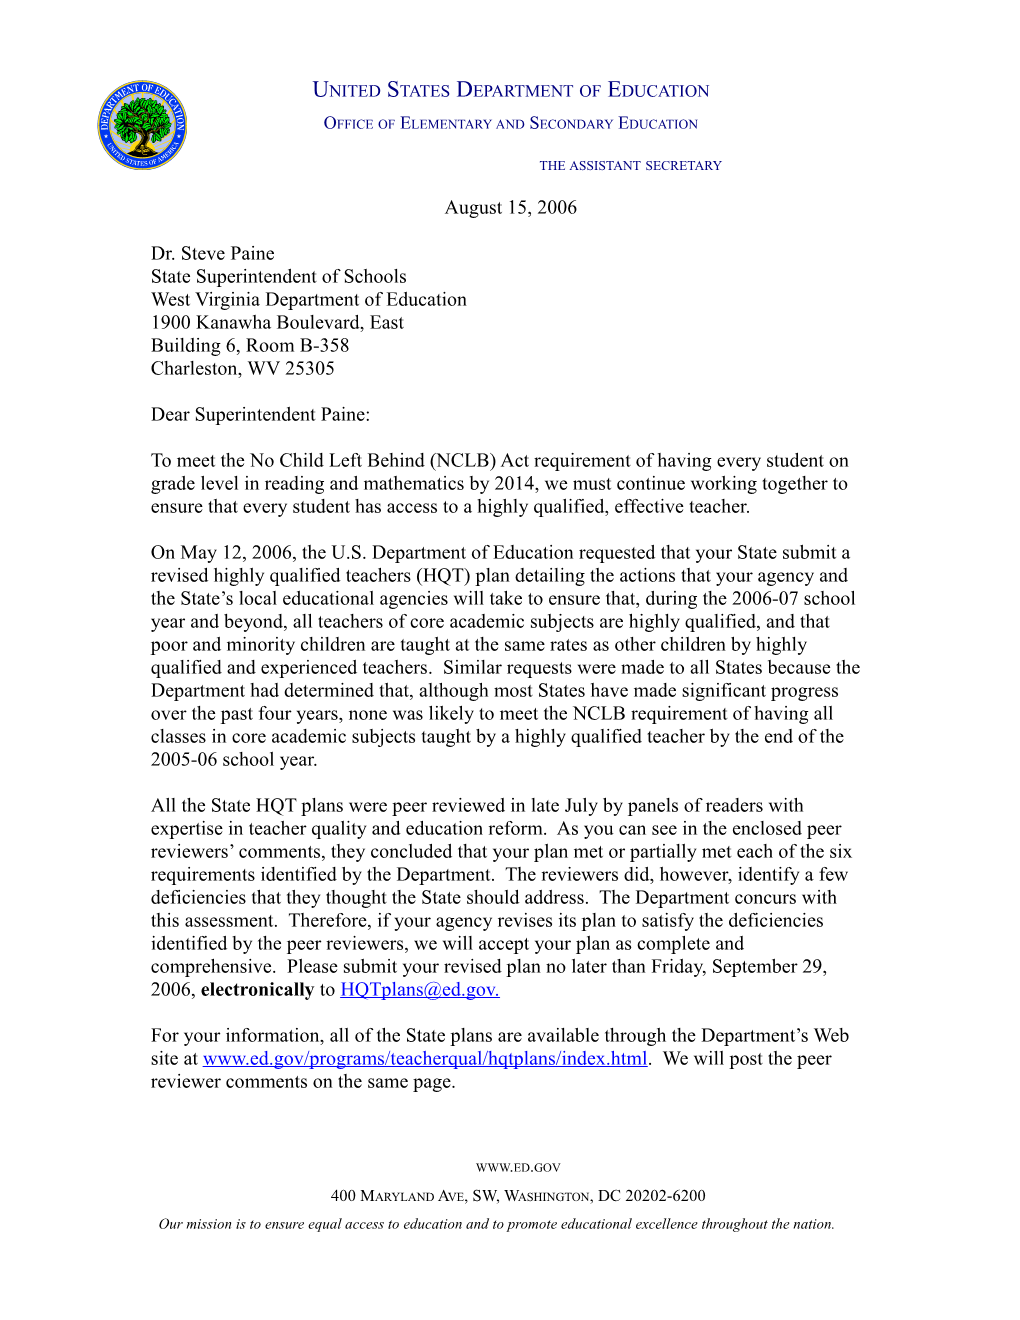 West Virginia Letter to Chief State School Officer Regarding the Peer Review Comments Of